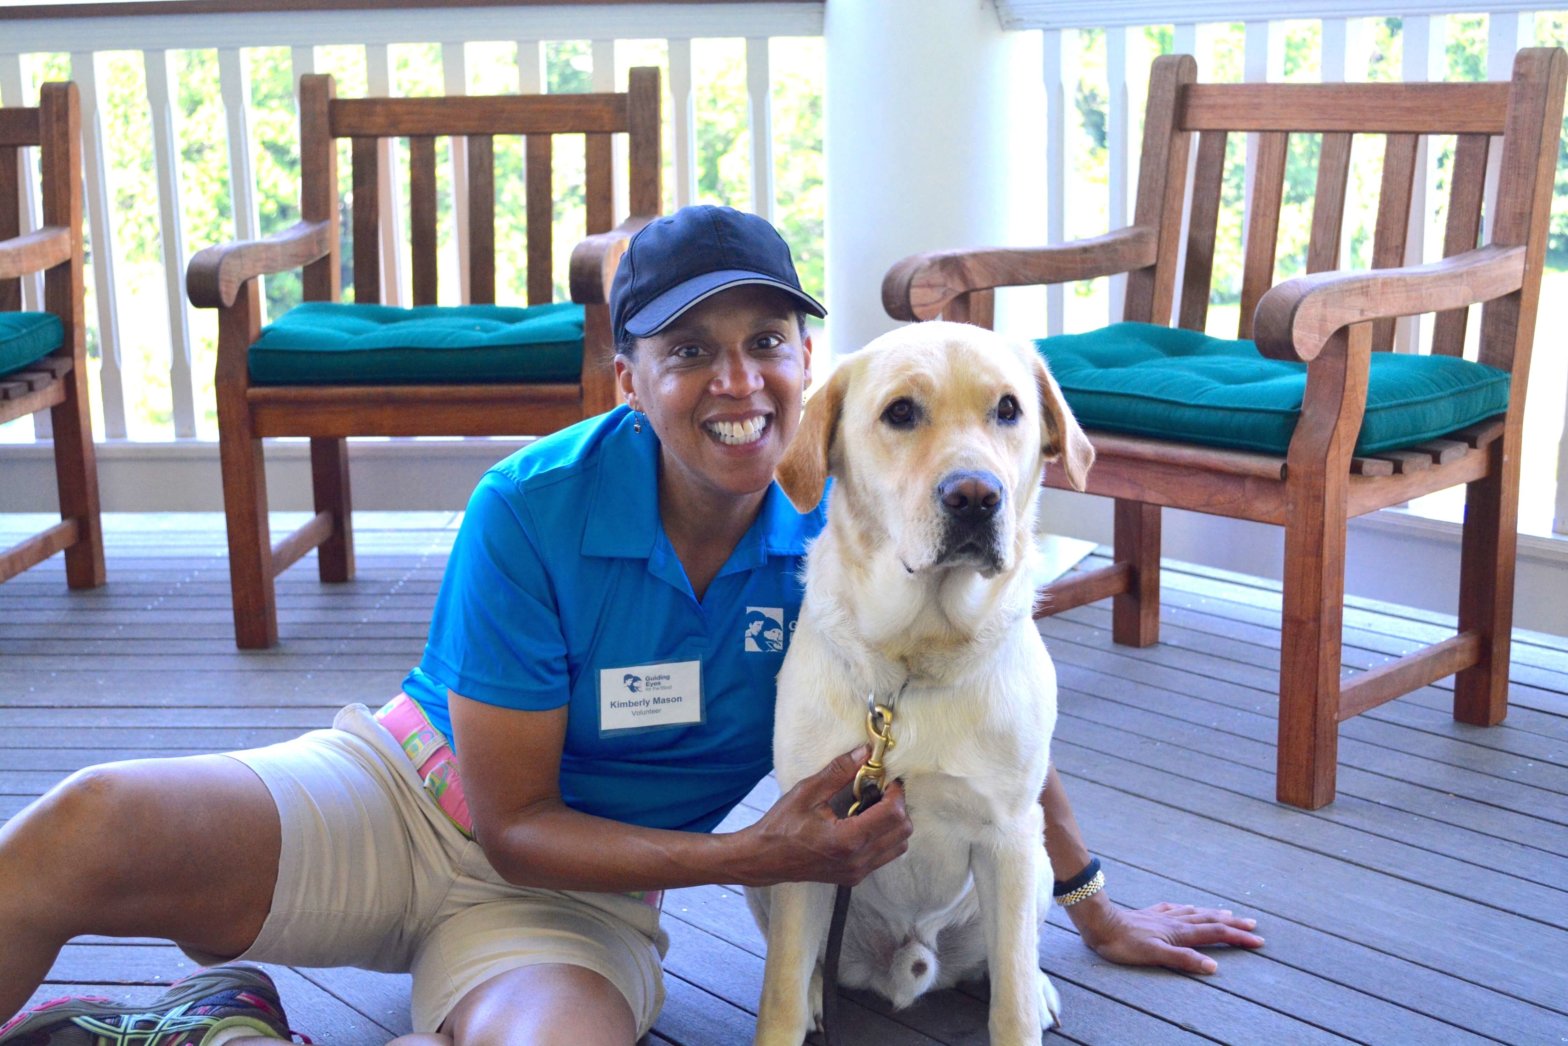 Volunteer Kimberly Mason poses next to a Guiding Eyes guide dog during an event